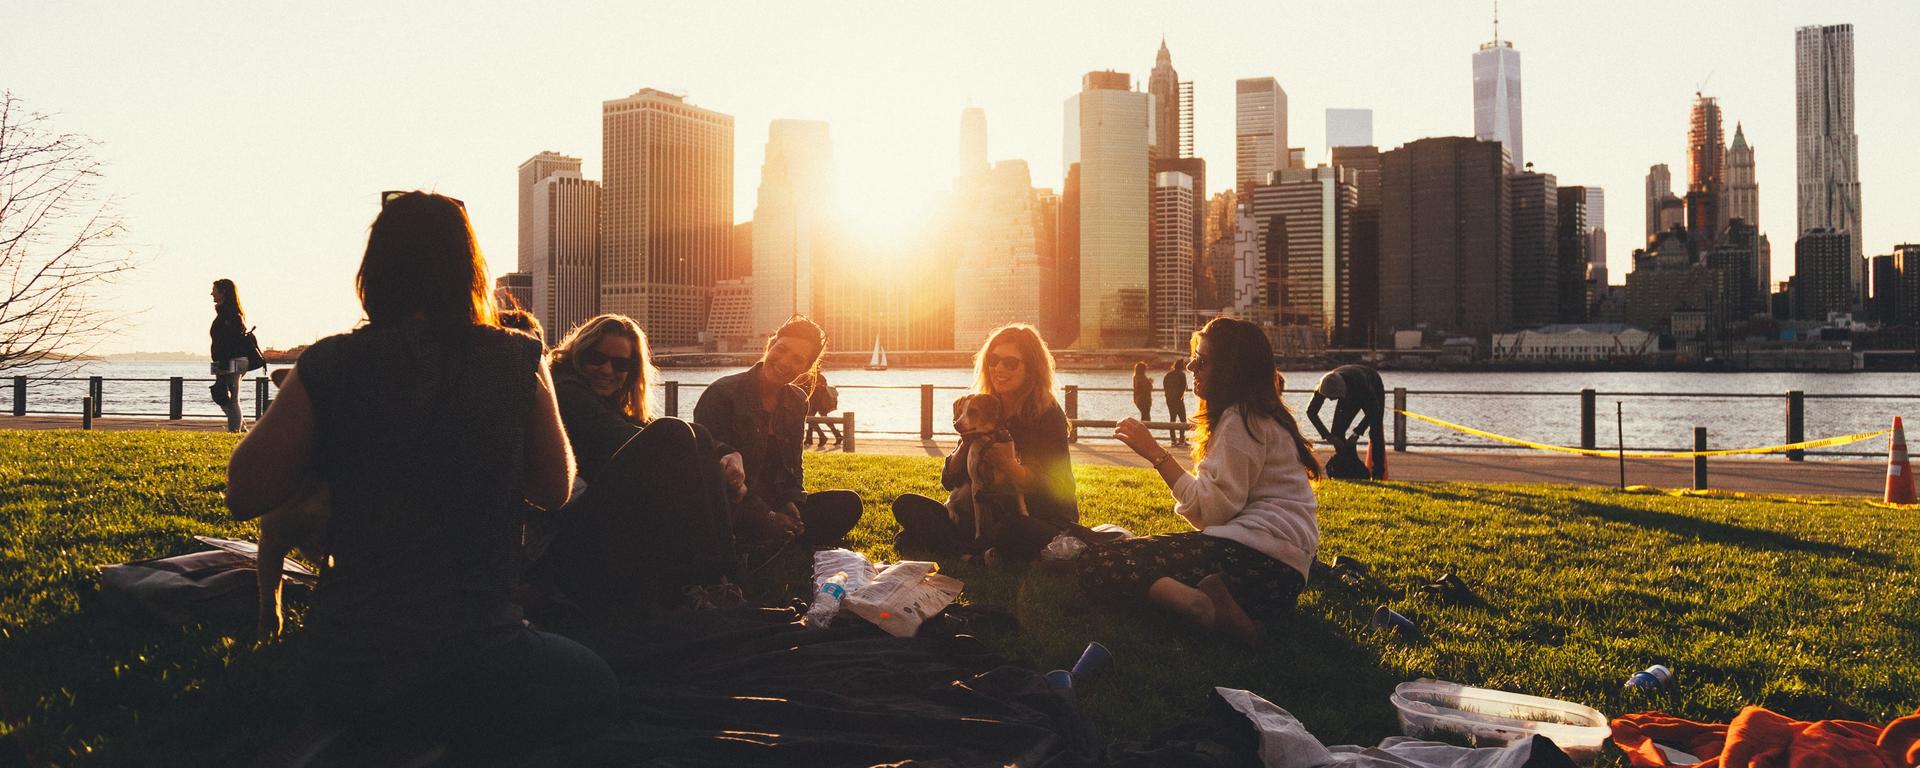 A group of students chatting, backlit by the sun, sitting in a riverside park looking towards downtown skyscrapers